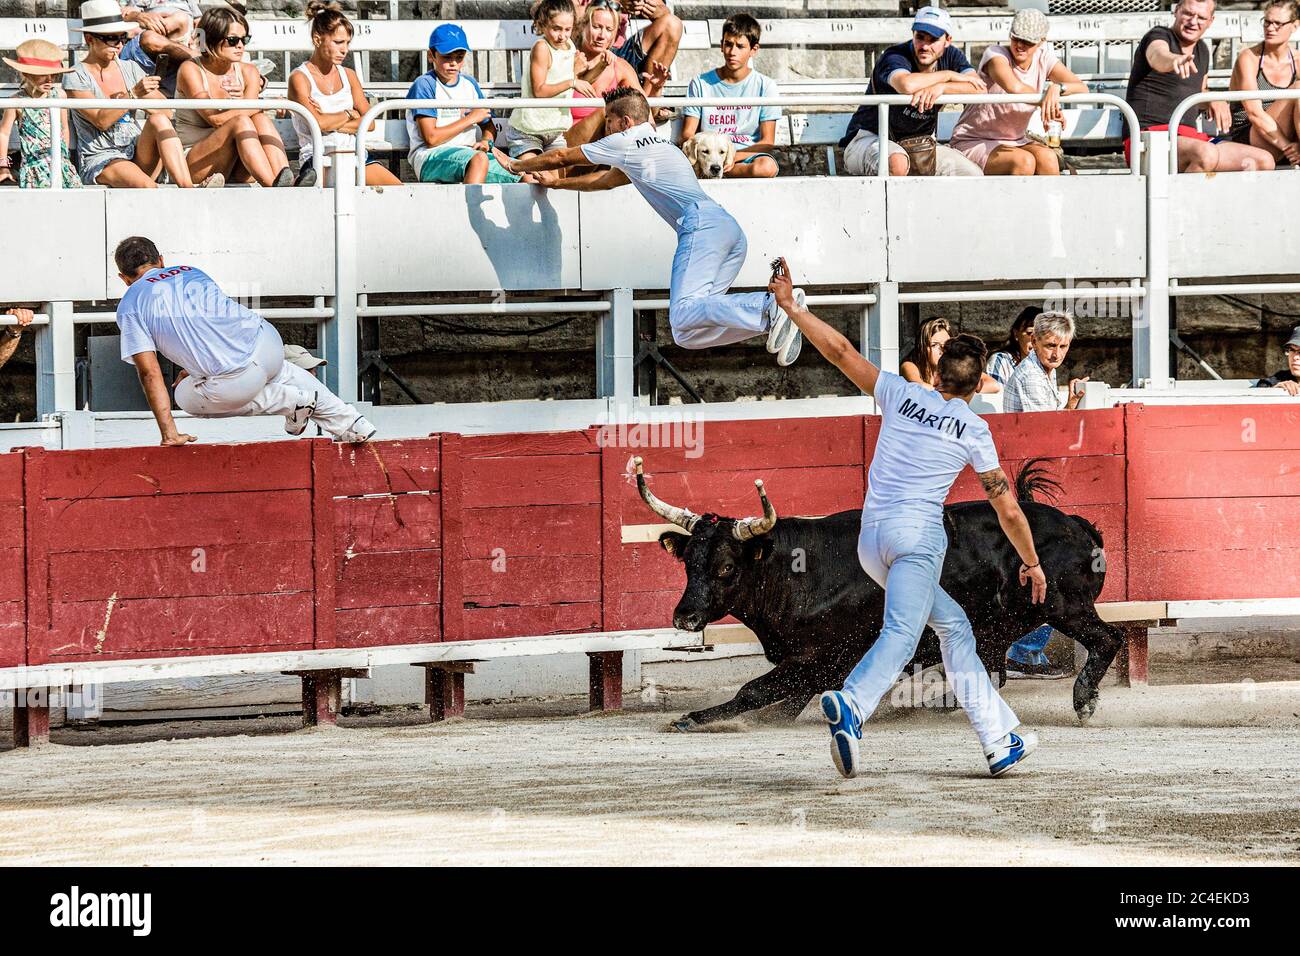 France Camargue - Arles - The Camarguese Courses is a non-violent bullfight that takes place mainly in the south of France, mainly in the Camargue. Stock Photo